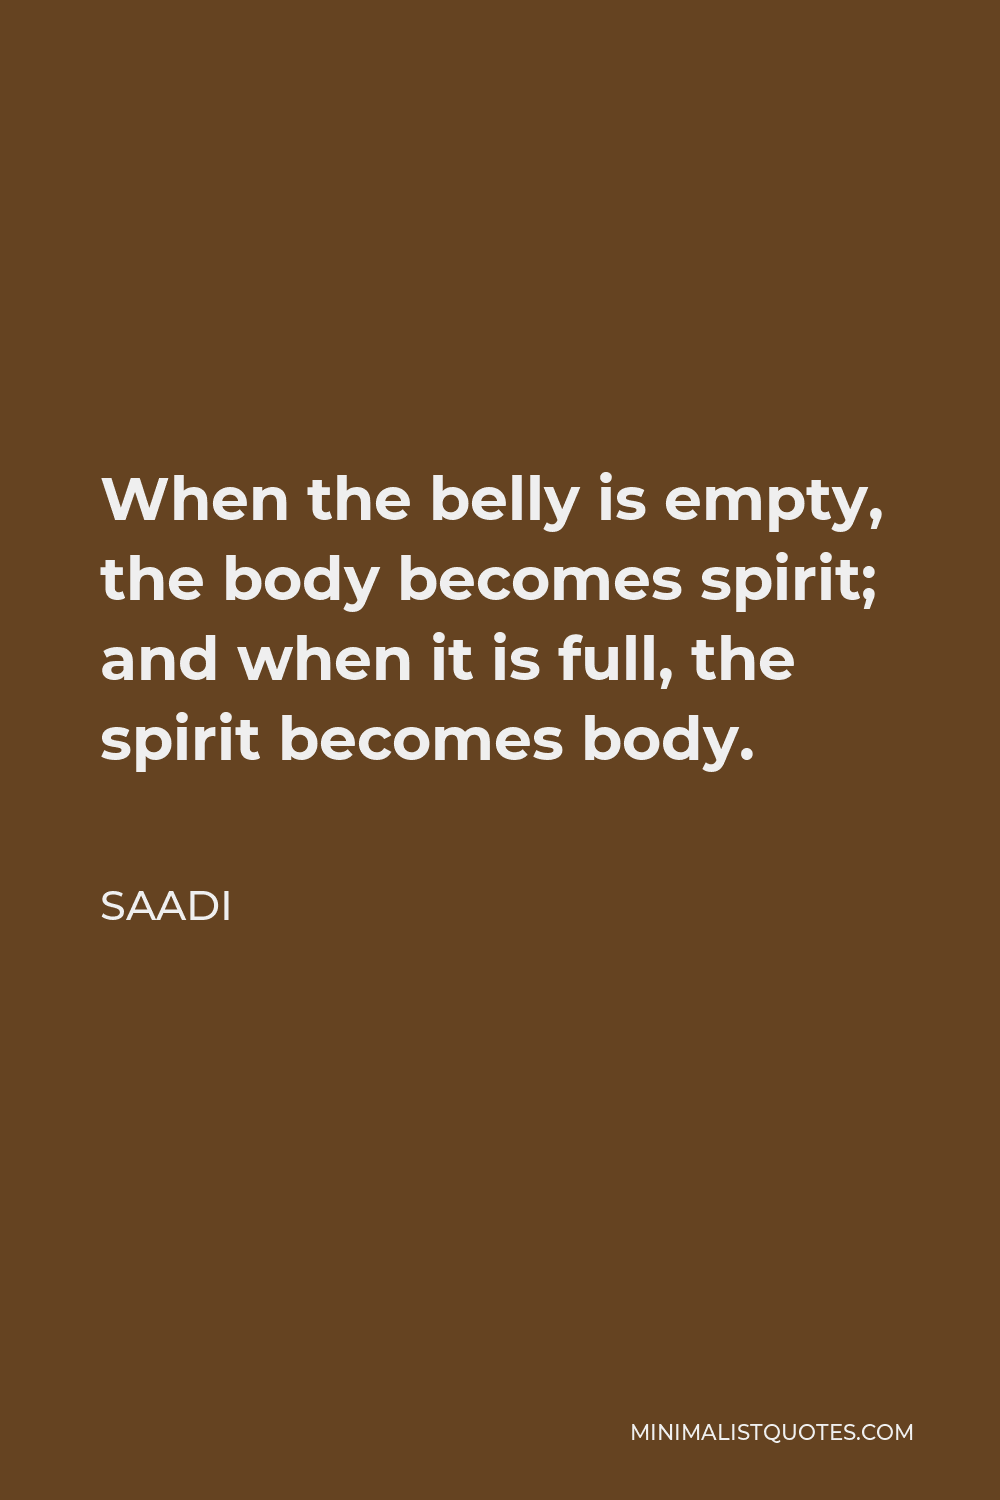 Saadi Quote - When the belly is empty, the body becomes spirit; and when it is full, the spirit becomes body.